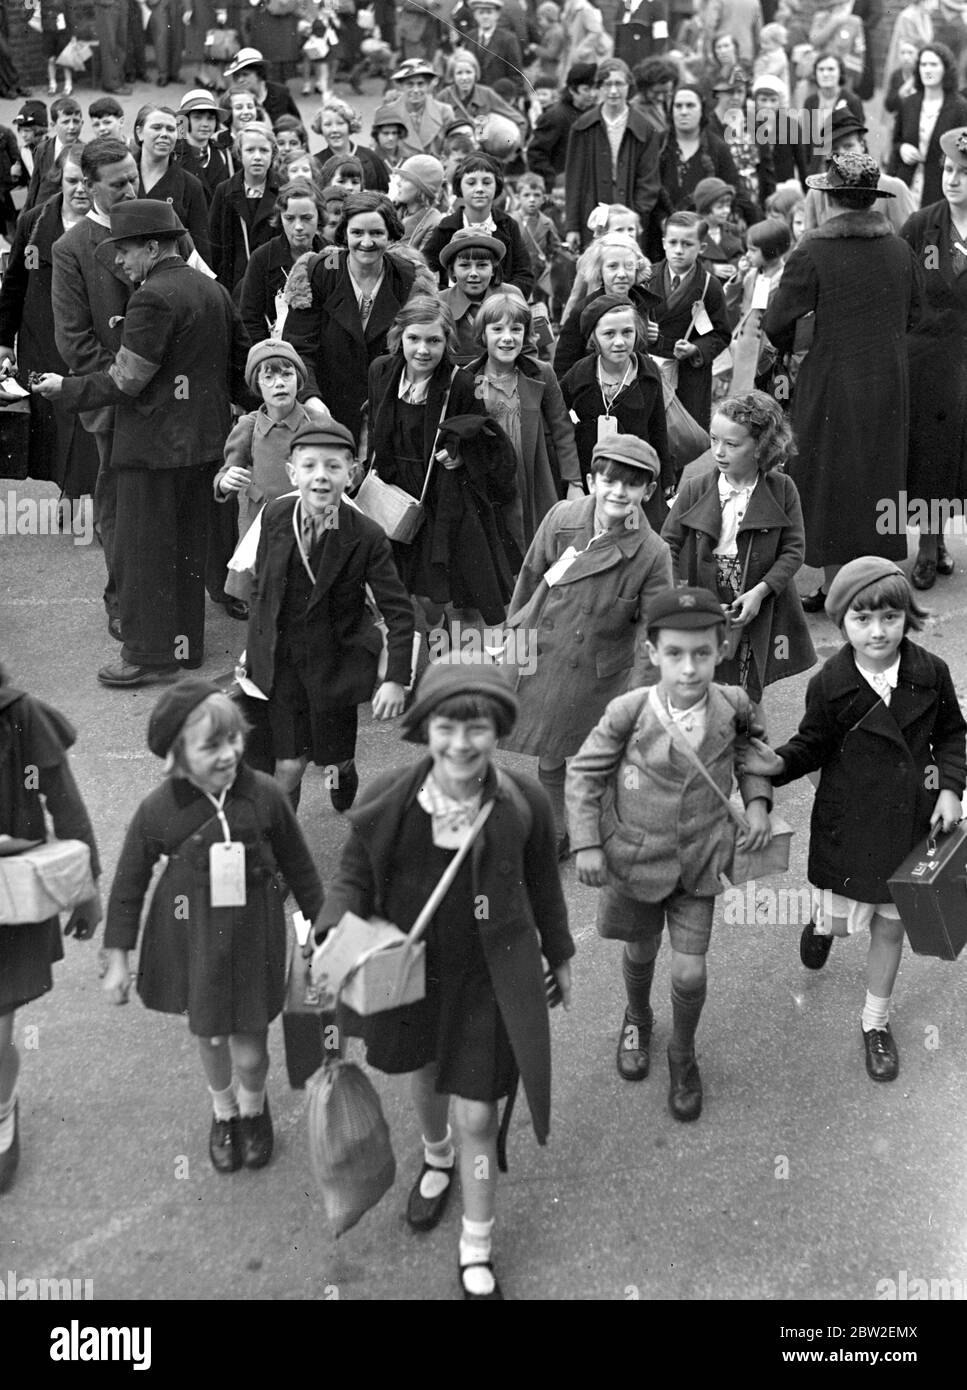 War Crisis, 1939. Air Raid precautions The Second World War began and evacuees like these in this picture, began to pour out of London for the safety of the countryside. Carrying gas-mask cases, with luggage labels identifying them fixed to their clothing - it was for some of them a Great Adventure for many of them had never left home, or even London before. Photo shows ; School children from Middlesex Street waiting for transport. 9 September 1939 Stock Photo